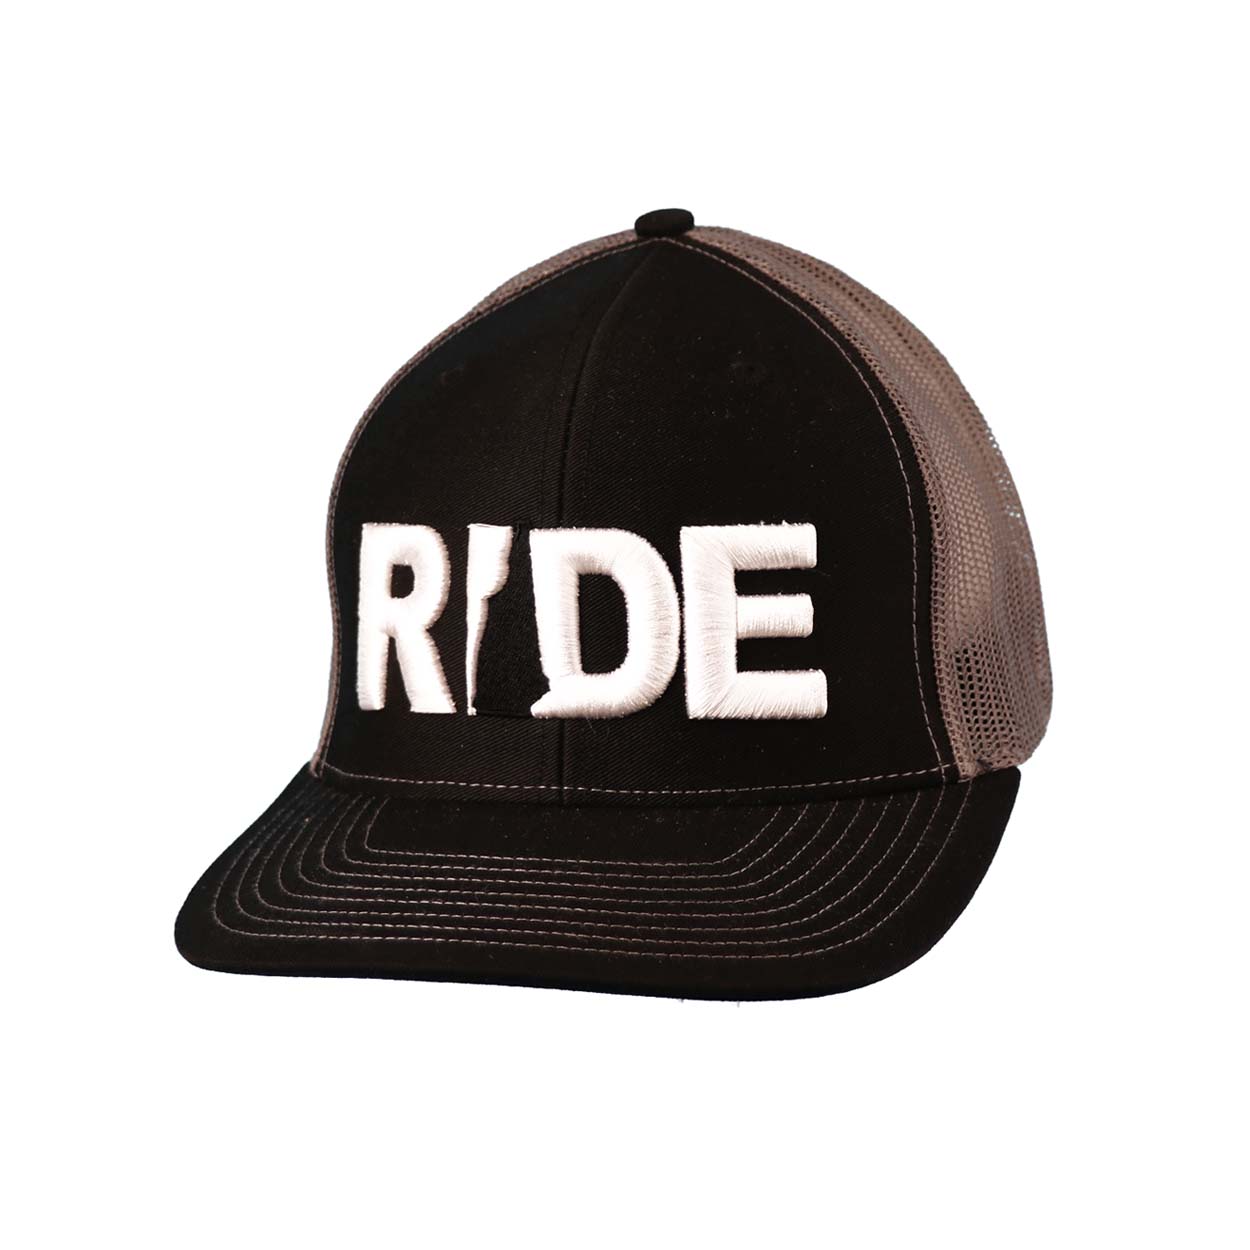 Ride New Hampshire Classic Embroidered Snapback Trucker Hat Black/Gray